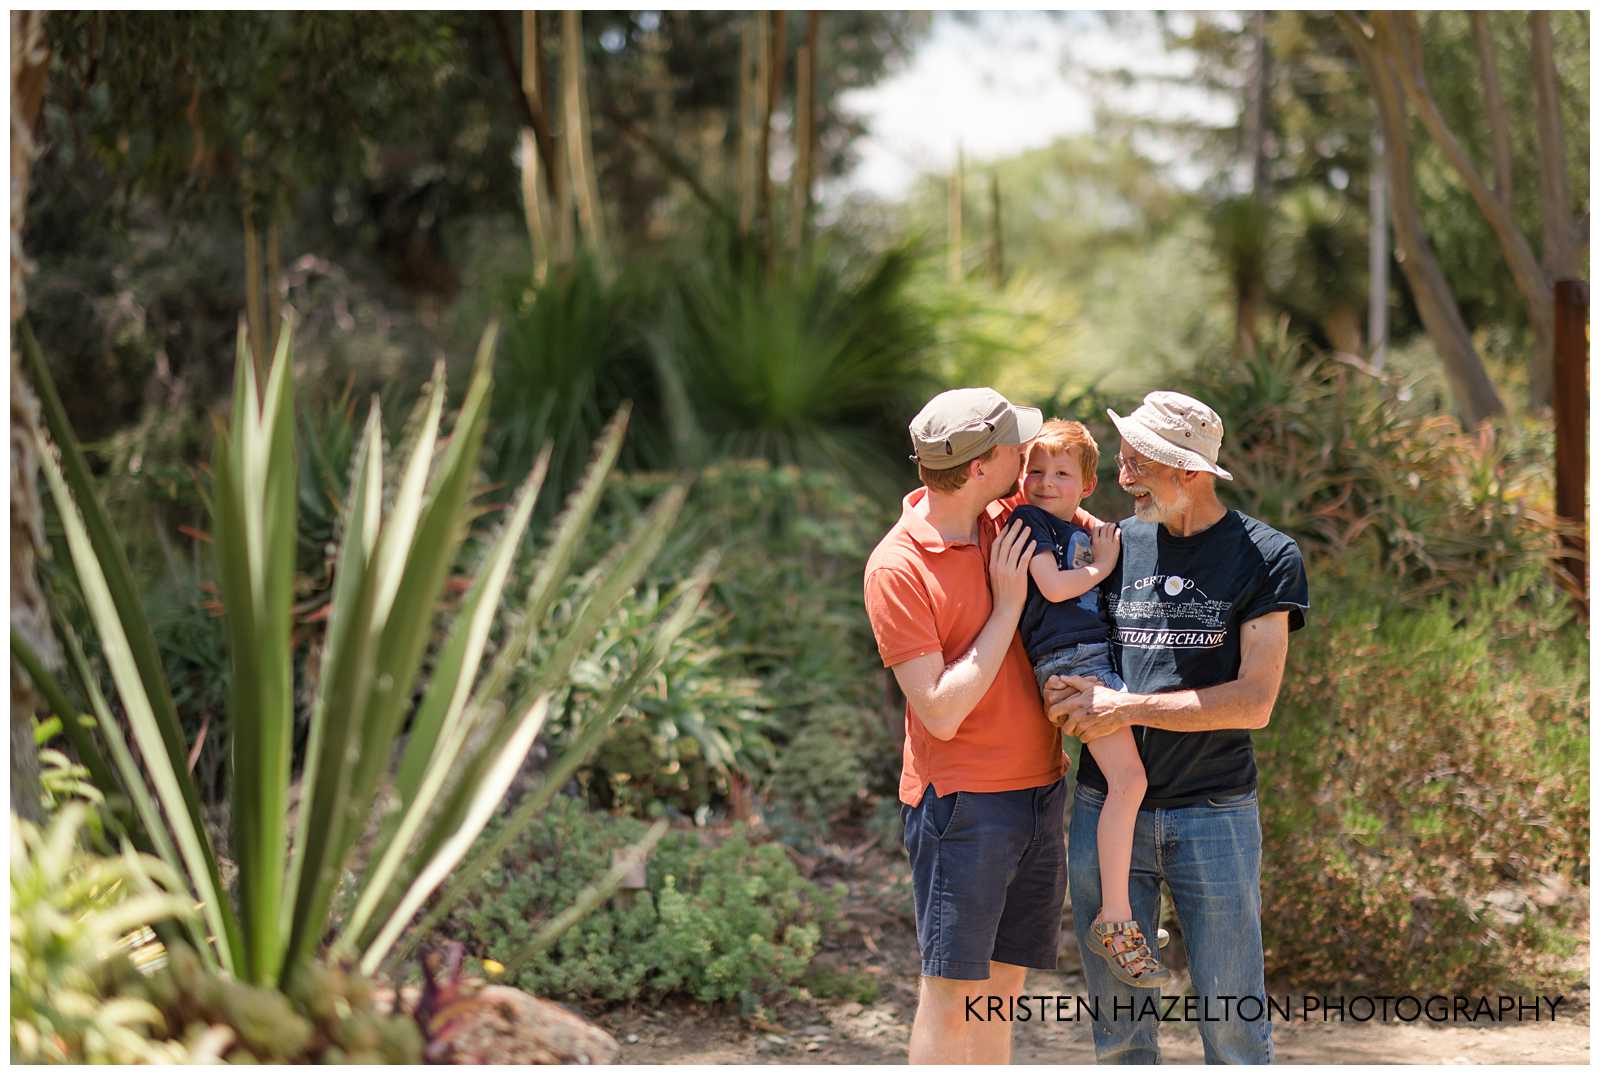 Family photos of a father, son, and grandfather at the Ruth Bancroft Garden in Walnut Creek, CA.